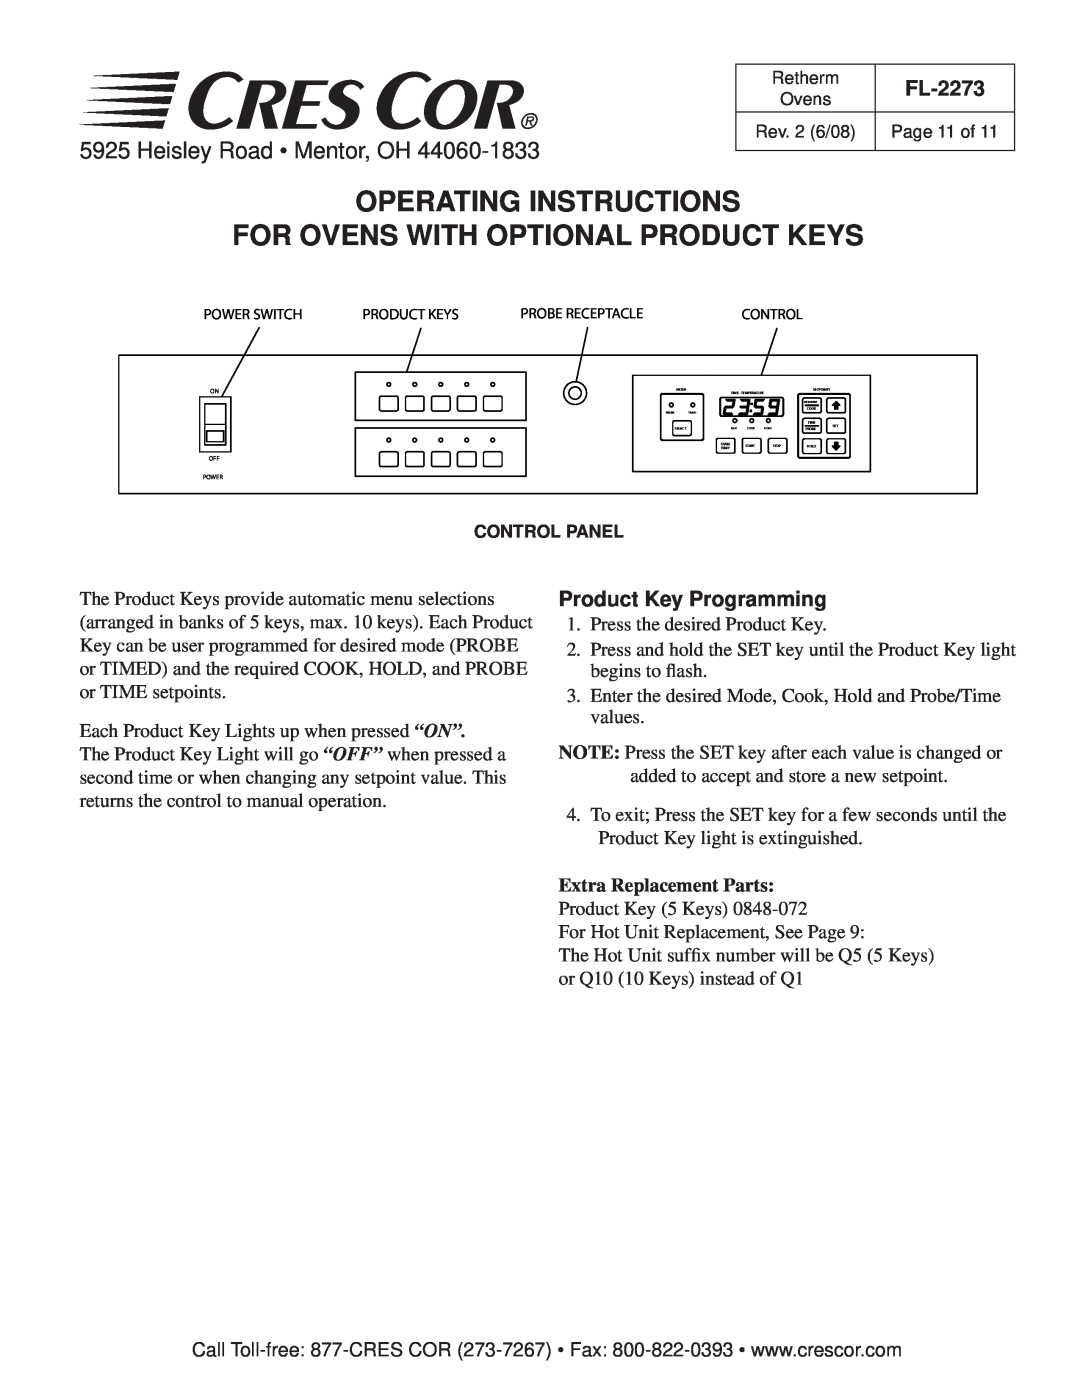 Cres Cor RR-1332 Series Retherm Ovens Operating Instructions For Ovens With Optional Product Keys, Heisley Road Mentor, OH 